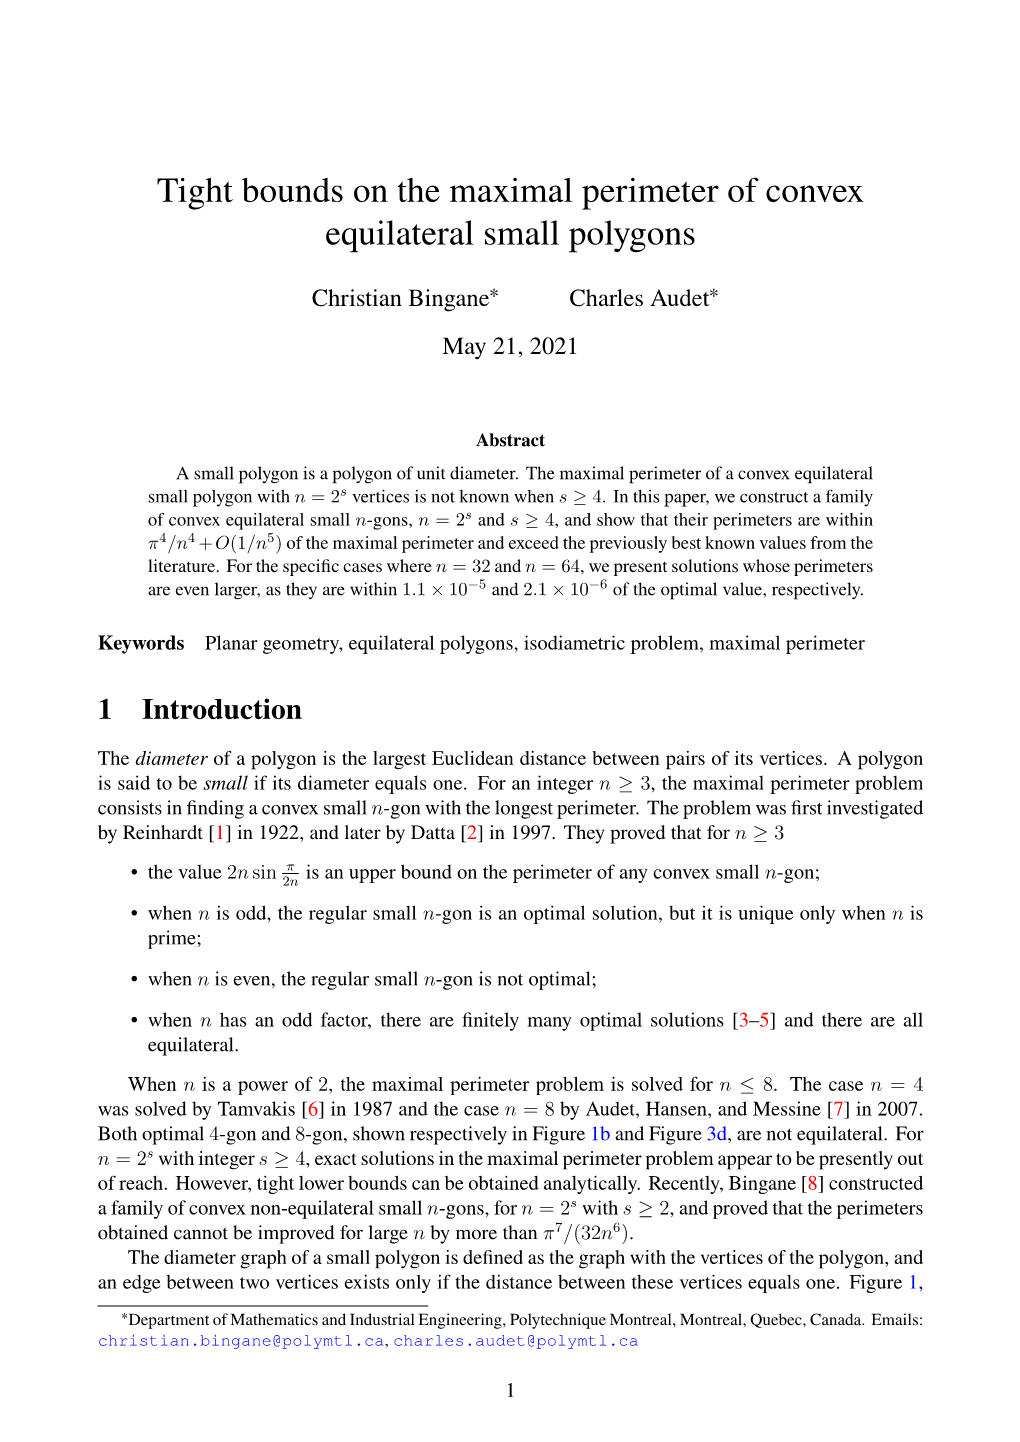 Tight Bounds on the Maximal Perimeter of Convex Equilateral Small Polygons